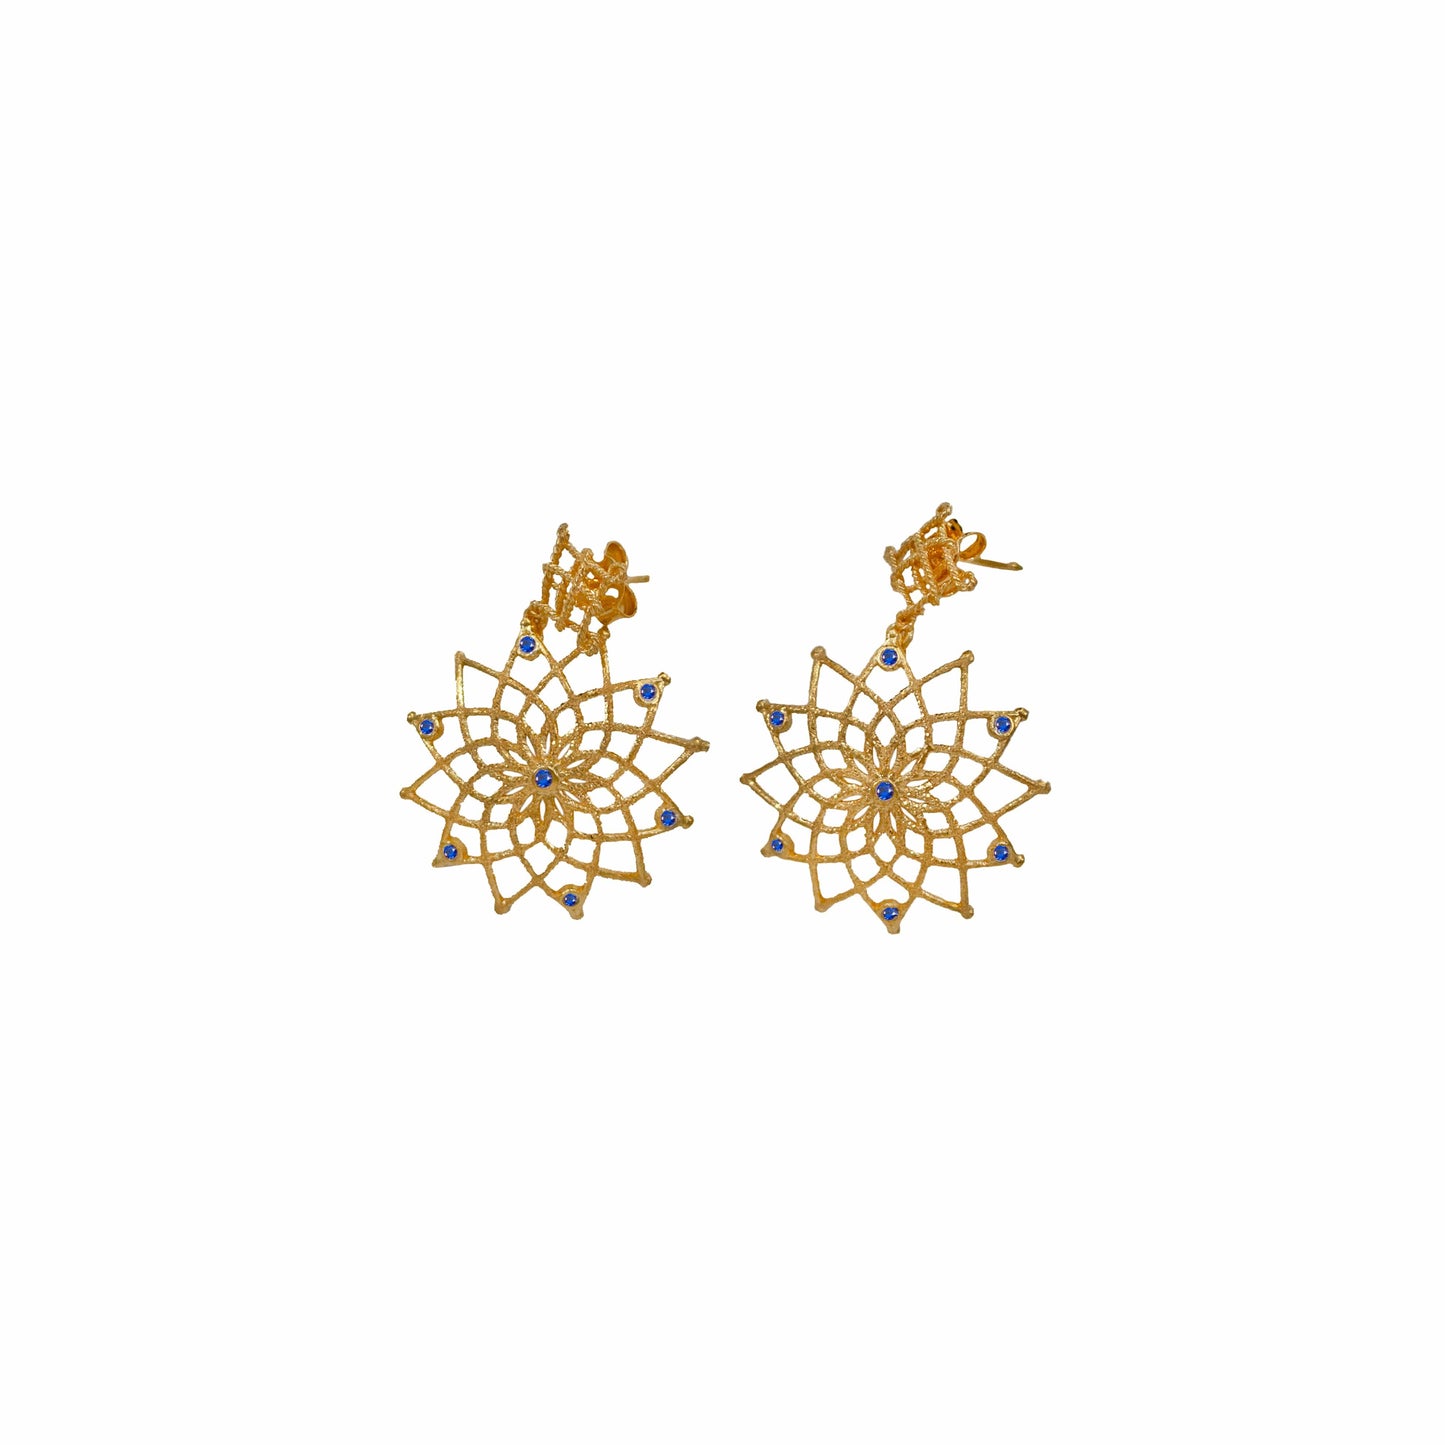 MONDO CATTOLICO 28 mm Gold Plated Caput Mundi Earrings Blue Crystals